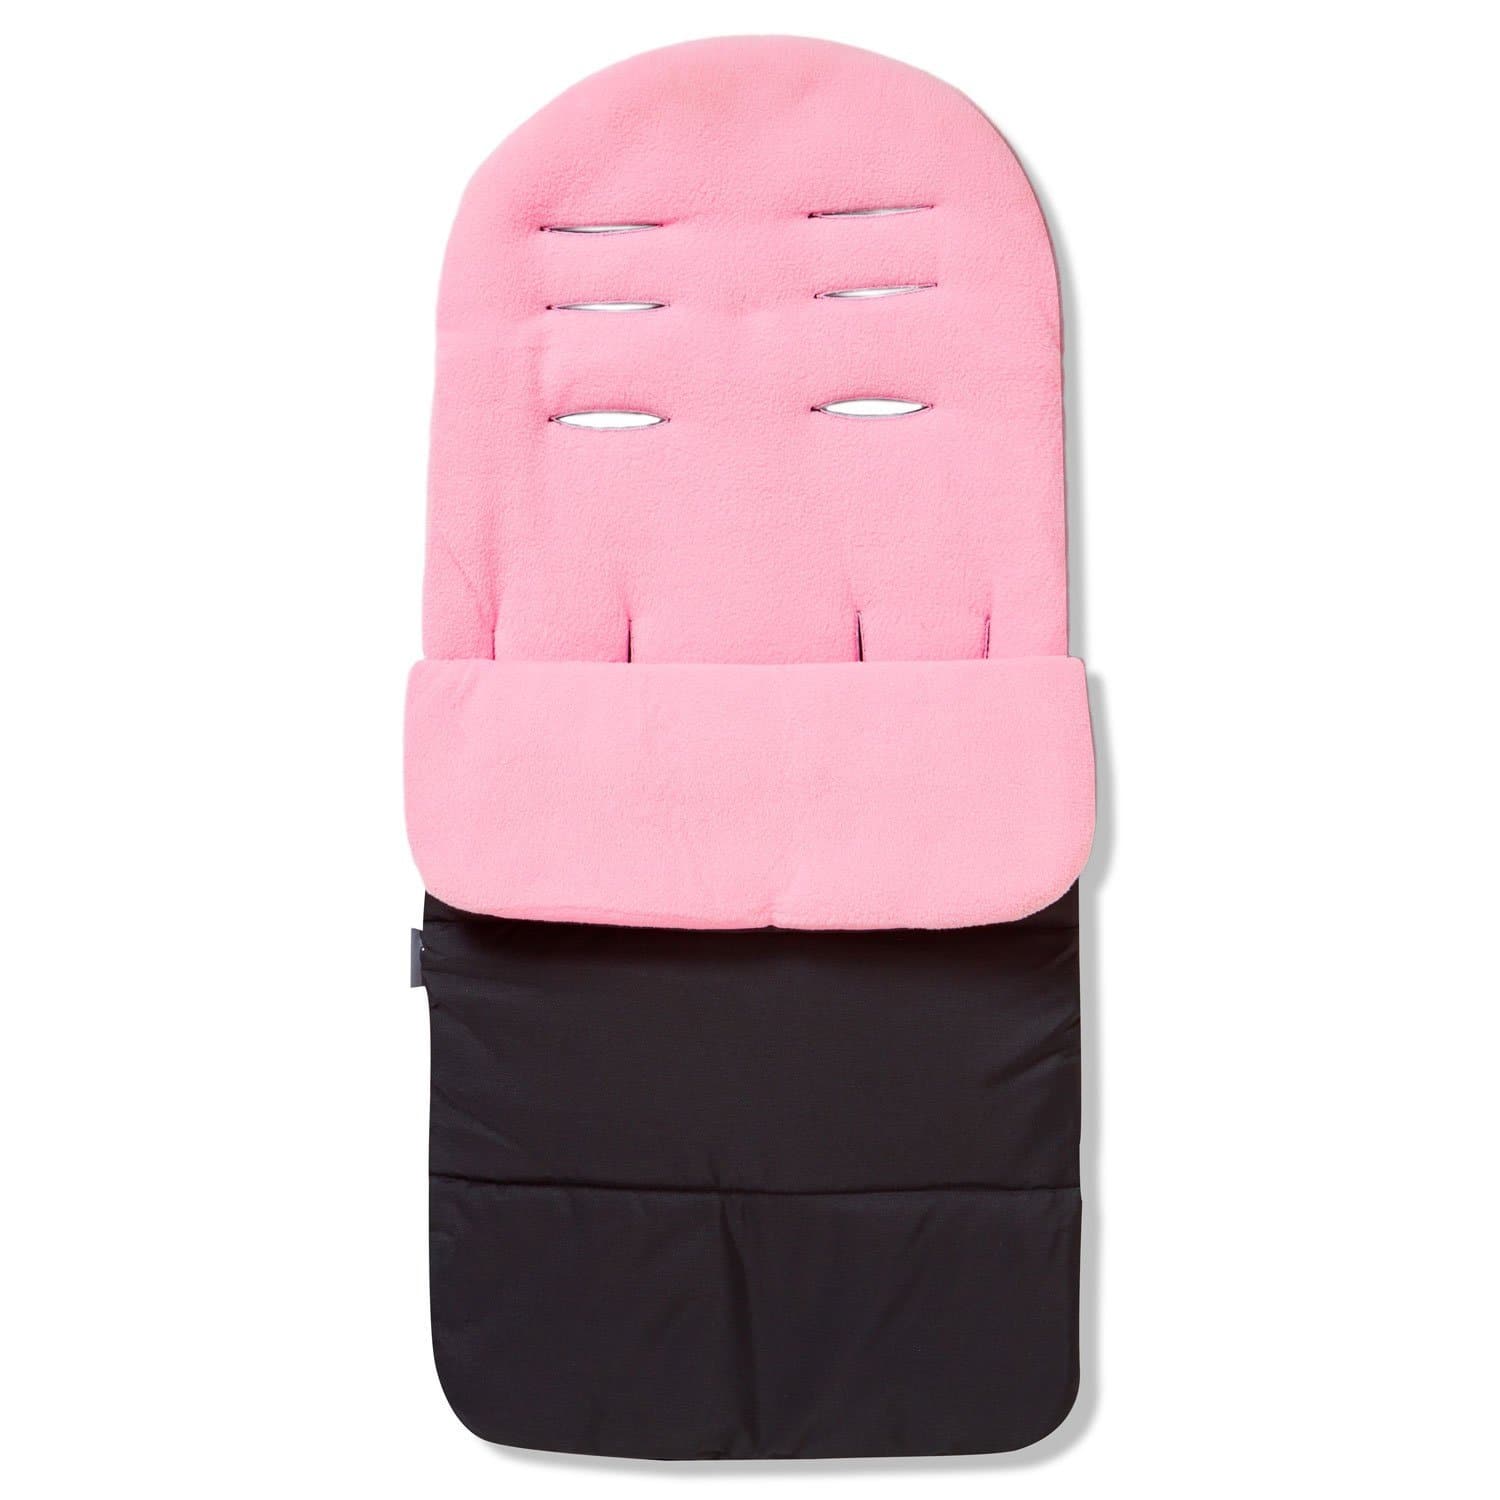 Premium Footmuff / Cosy Toes Compatible with Uppababy - Candy Pink / Fits All Models | For Your Little One